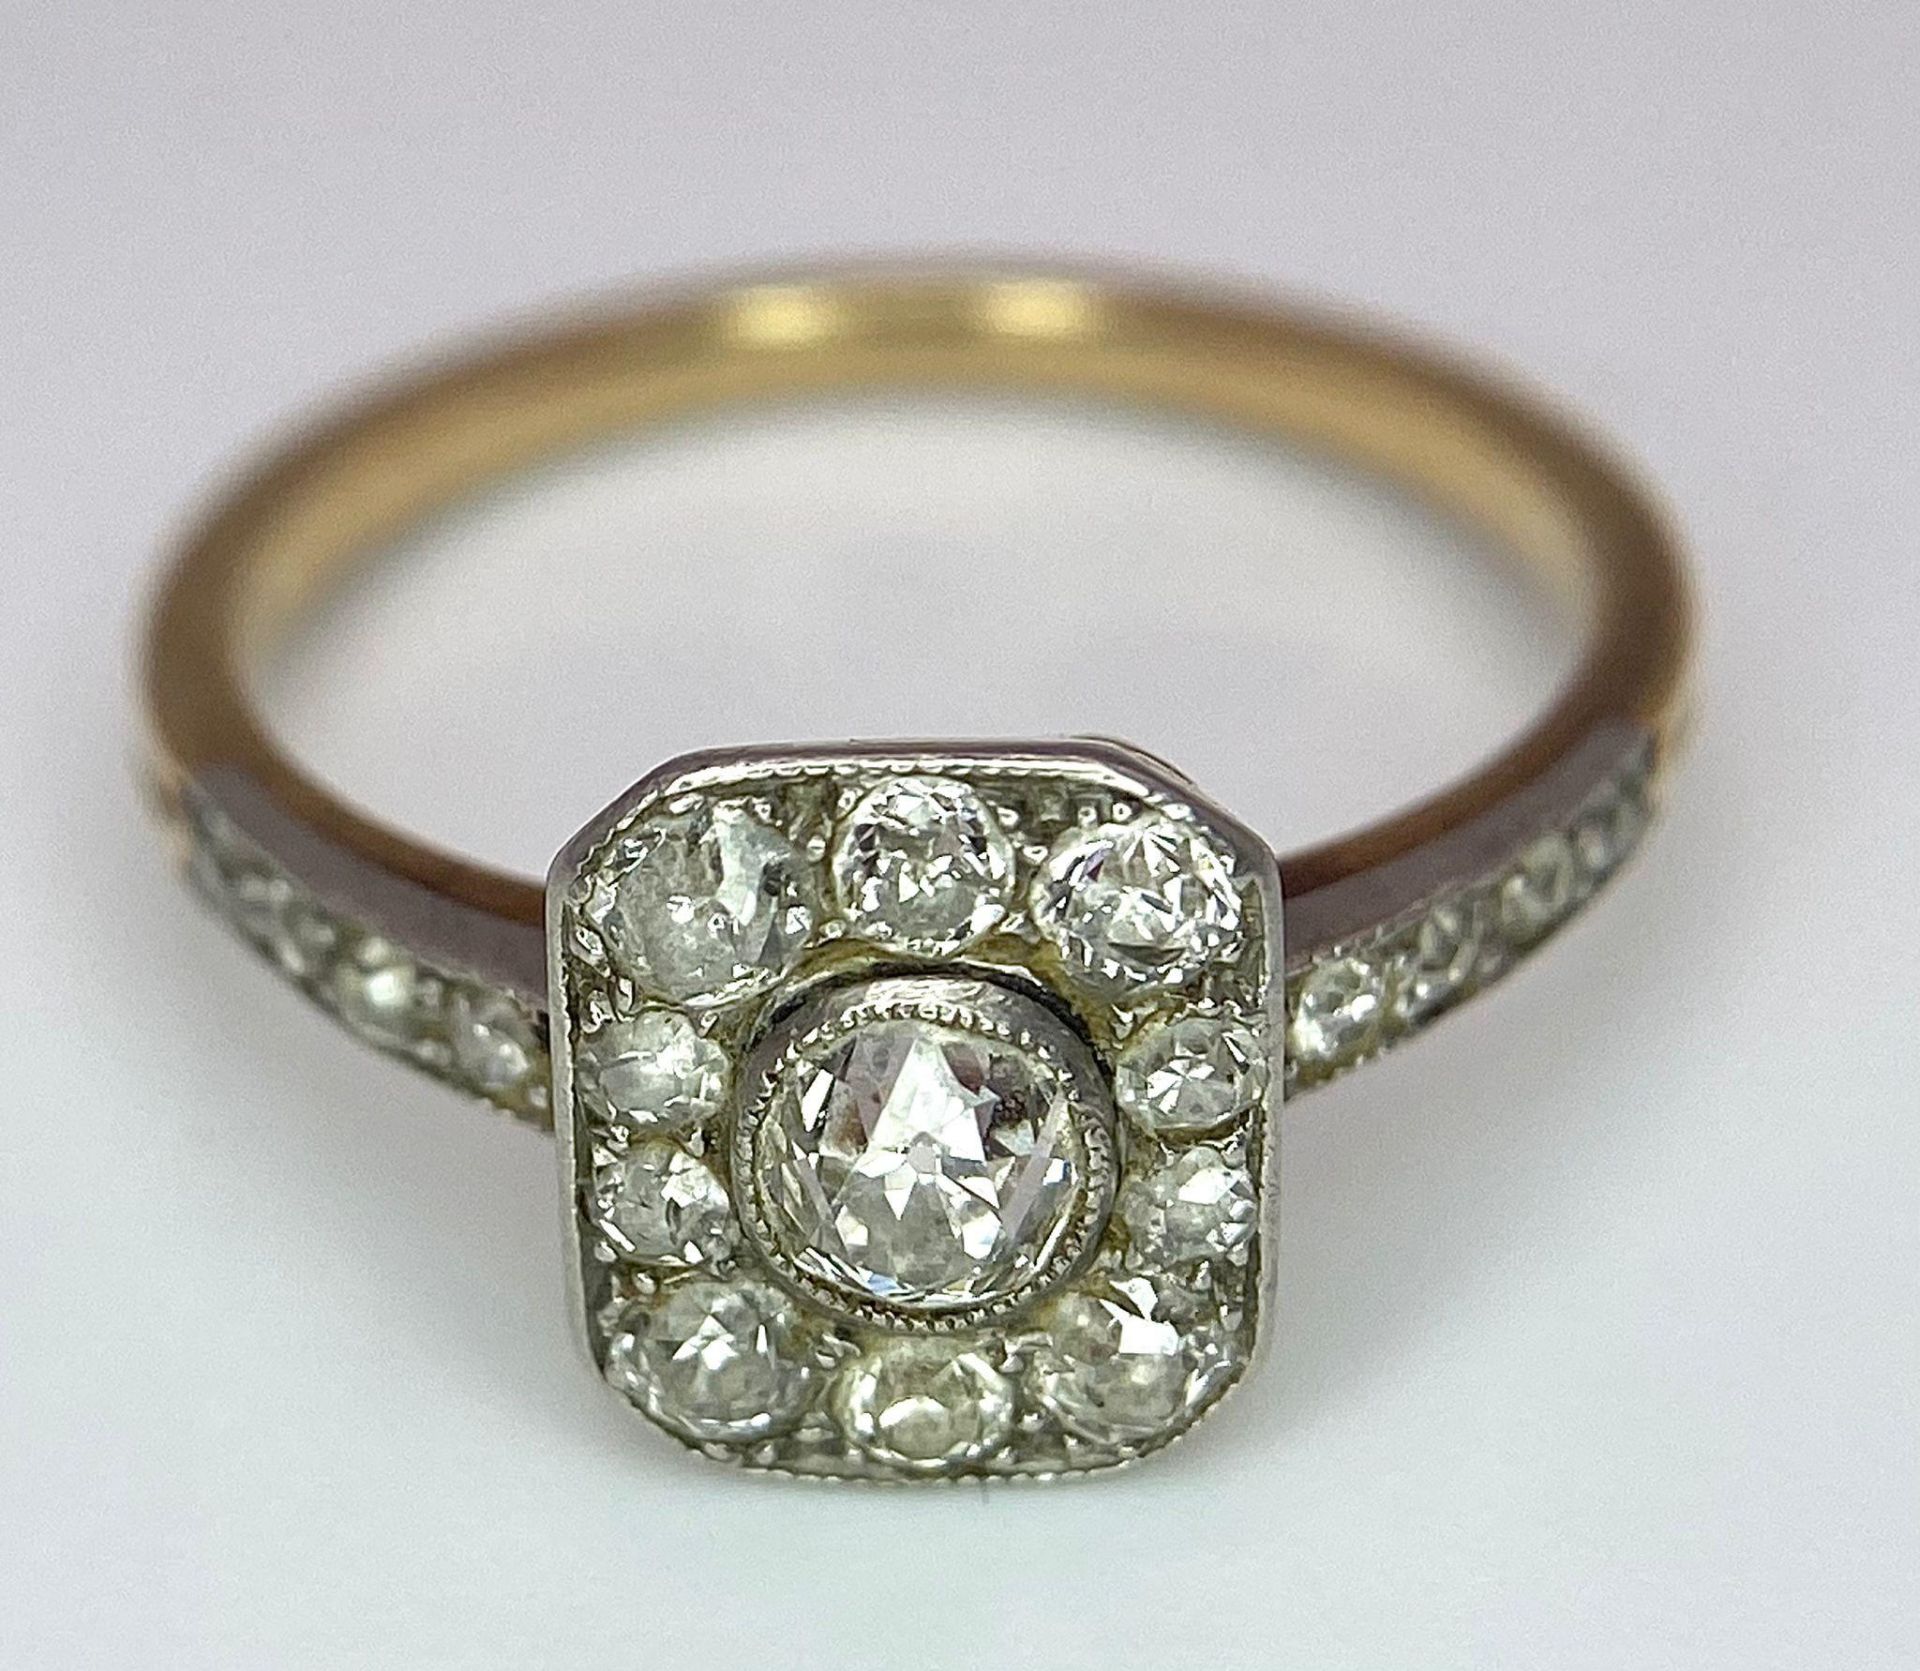 A 9 K yellow gold ring with an ART DECO style diamond cluster and more diamonds on the shoulders, - Image 6 of 8